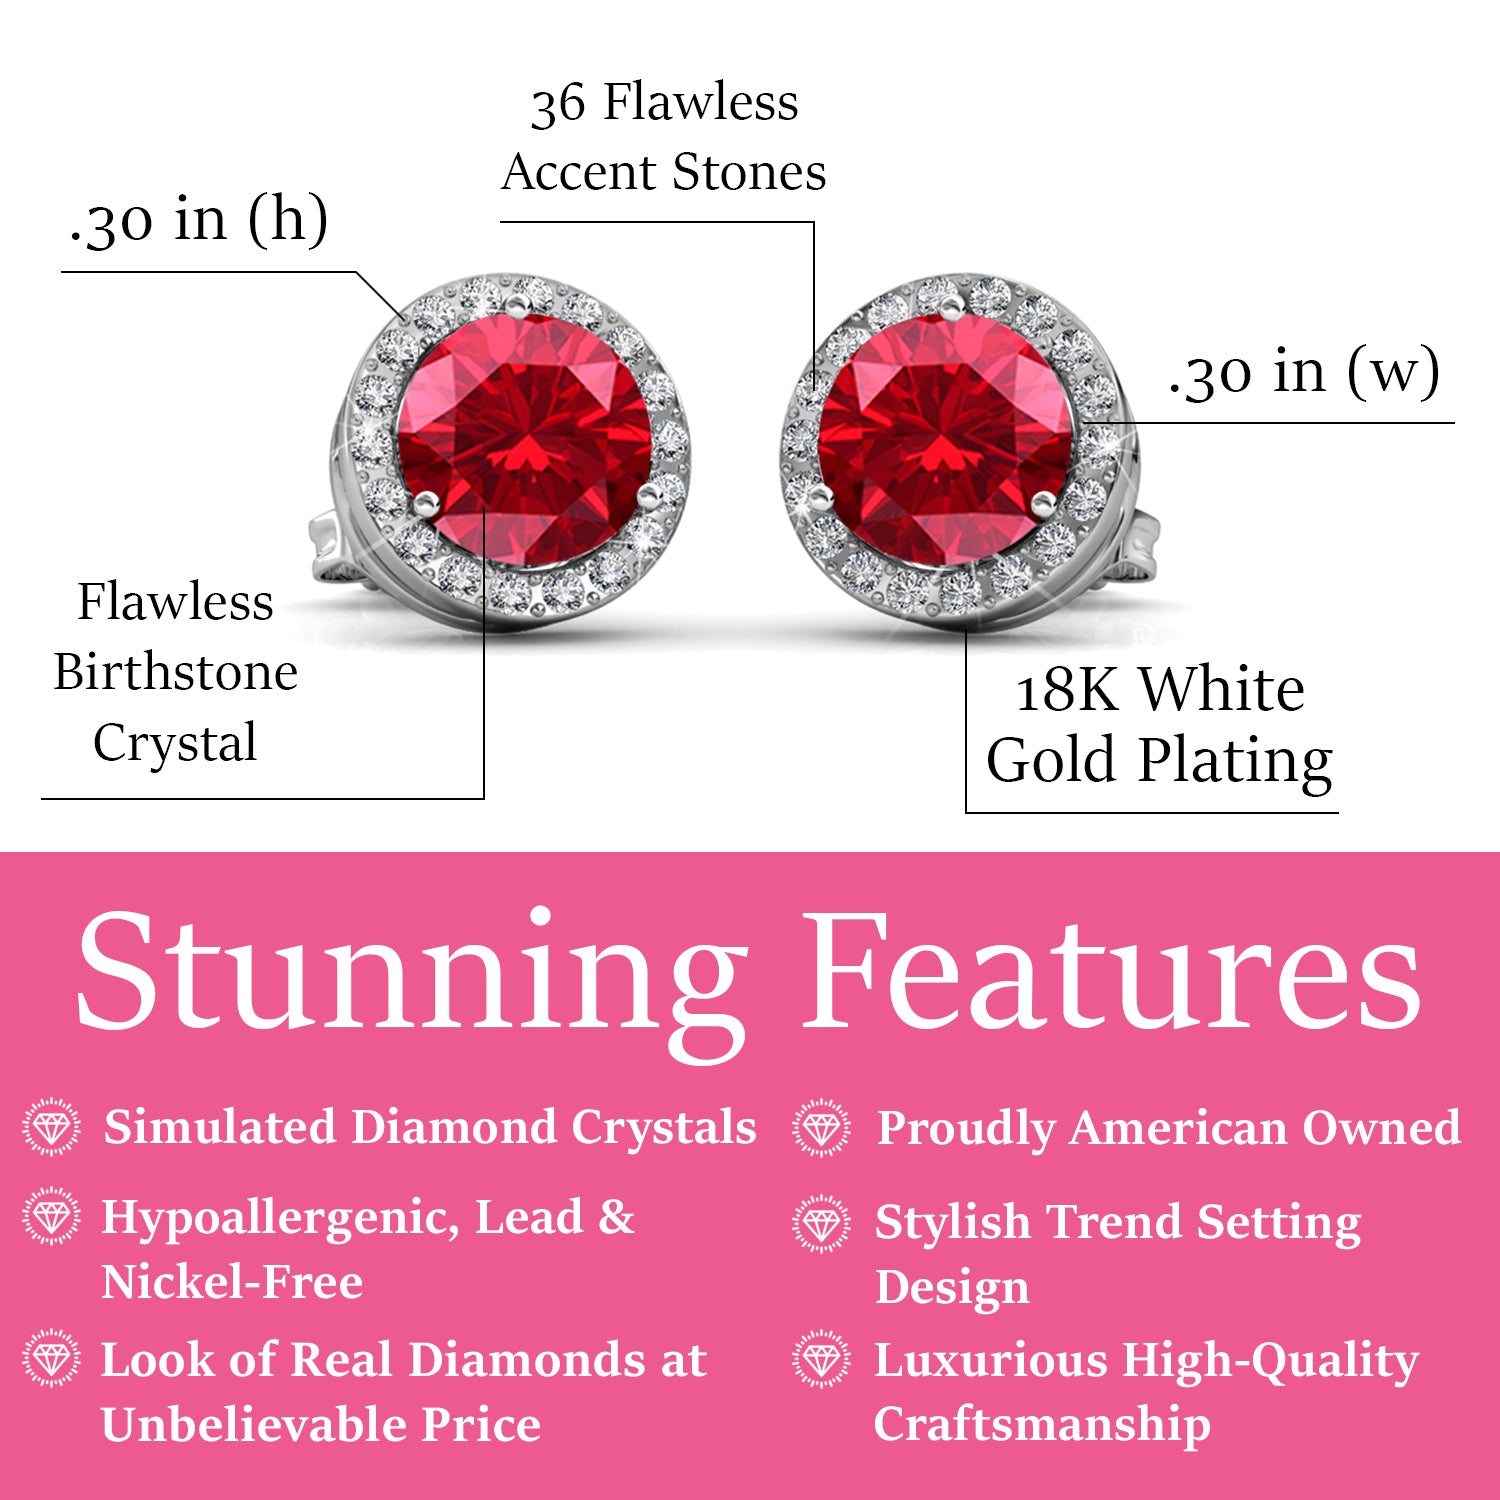 Royal July Birthstone Ruby Earrings, 18k White Gold Plated Silver Halo Earrings with Round Cut Crystals